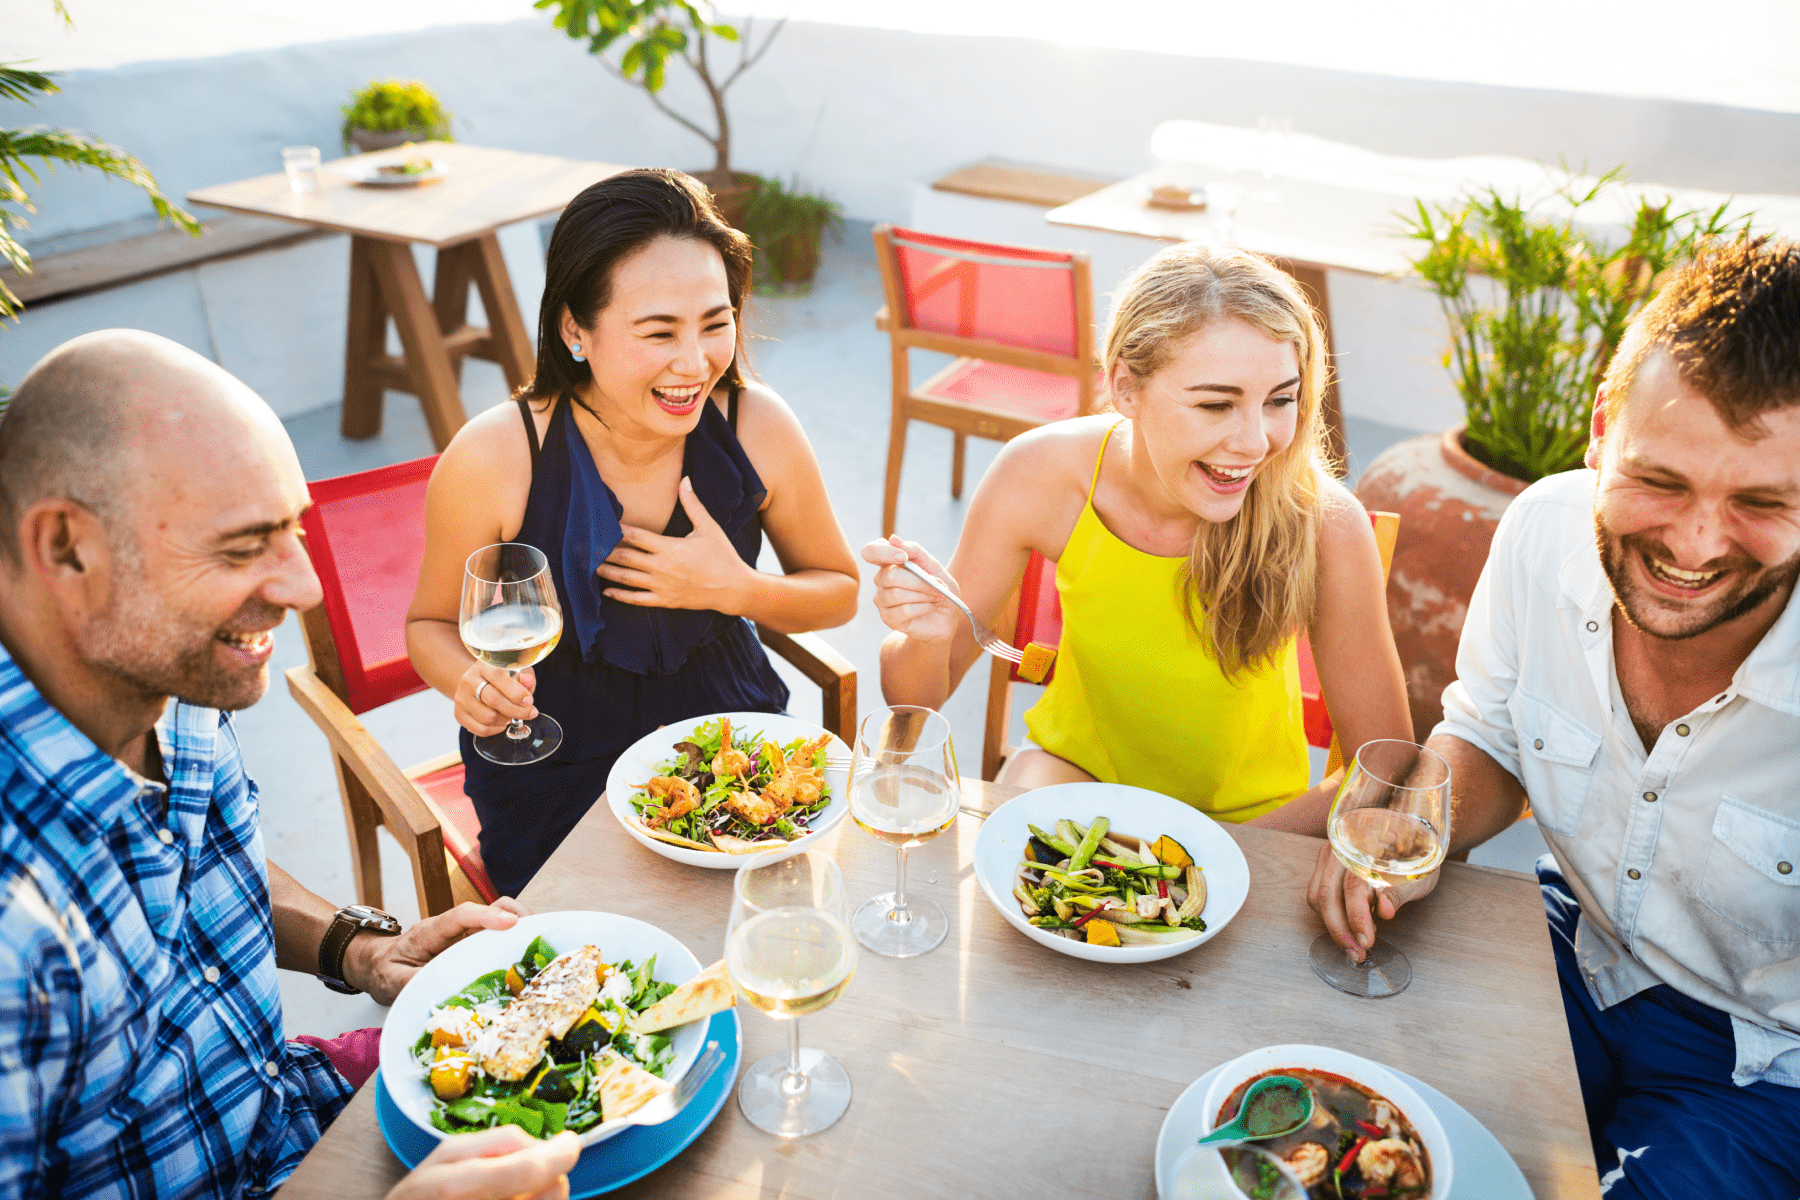 Four friends laughing together at a table with plates of food and glasses of wine.